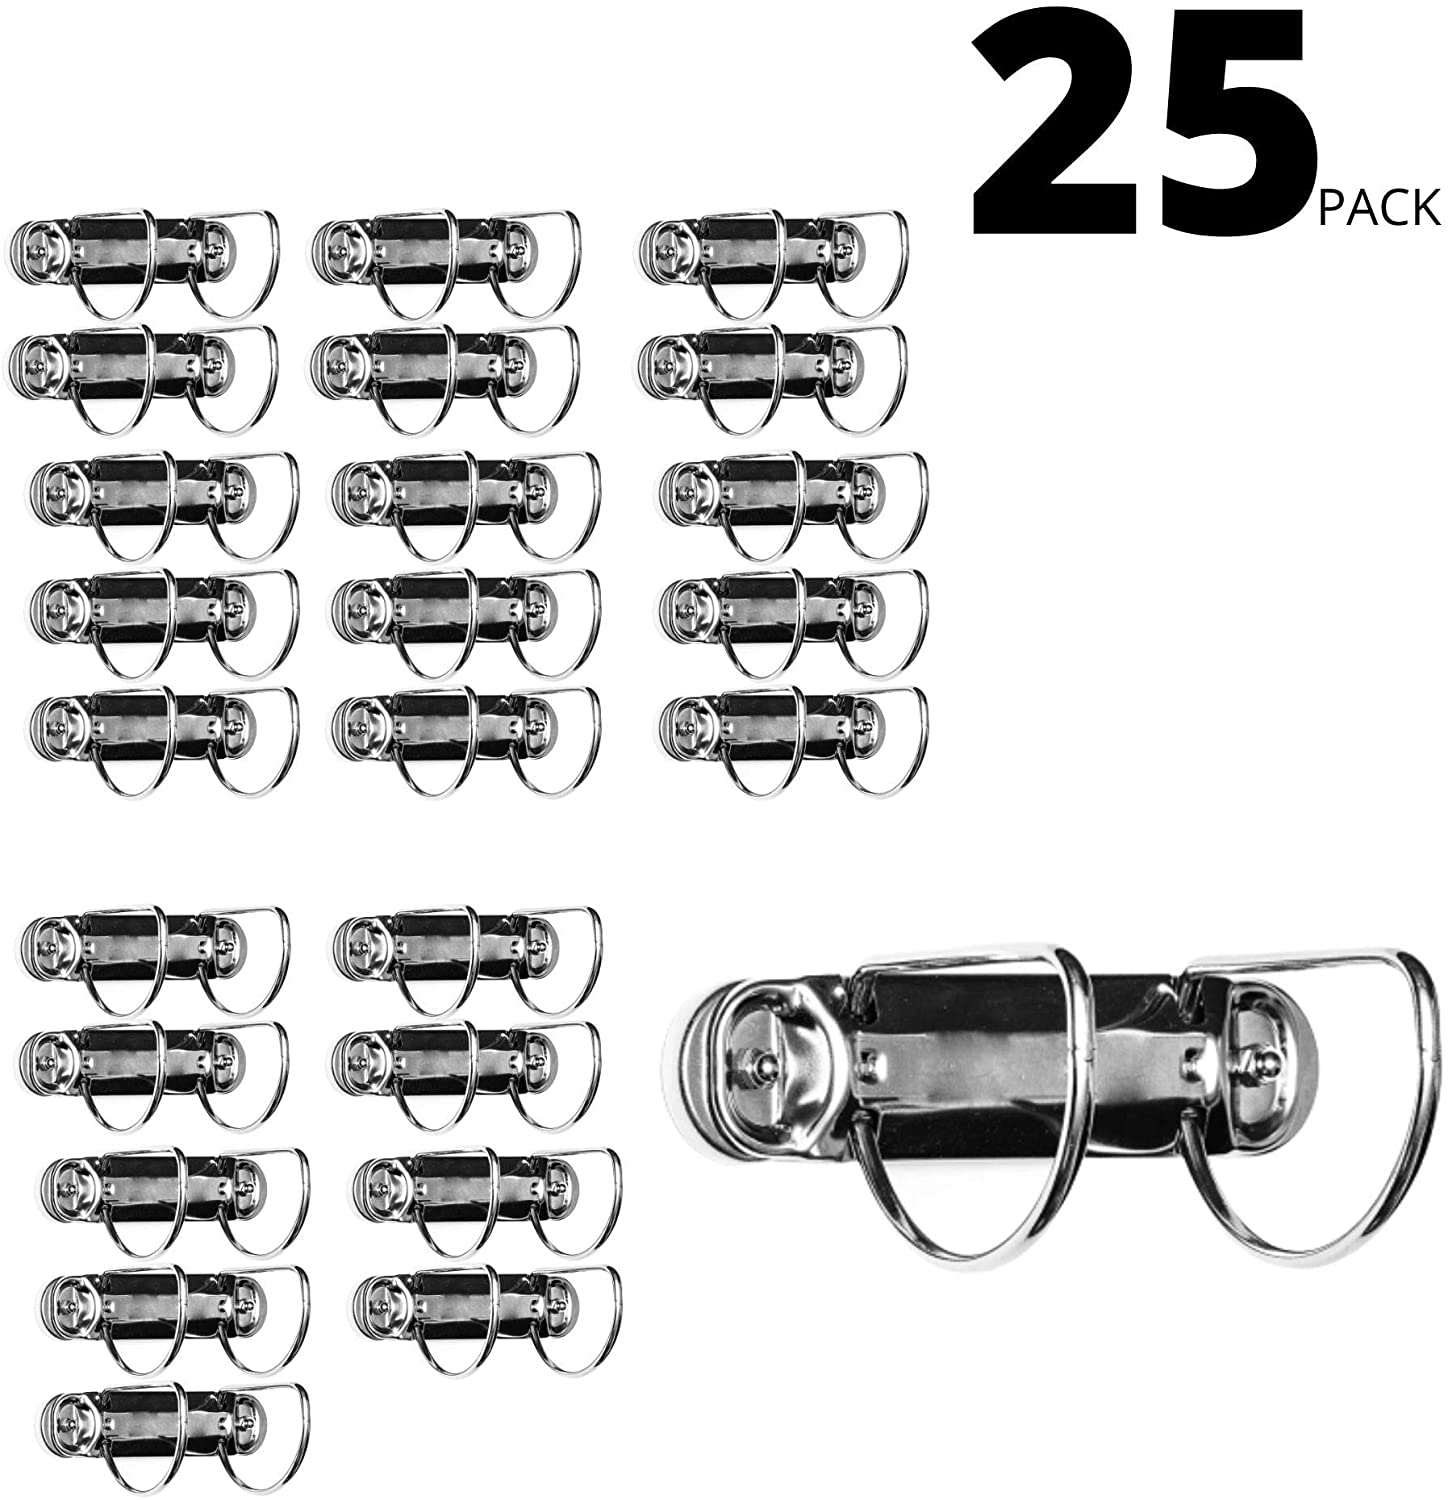 Magnetic 2 Ring Binder Locking Mechanism, 1 inch D Shaped Rings For A5 Size - 25 Pack